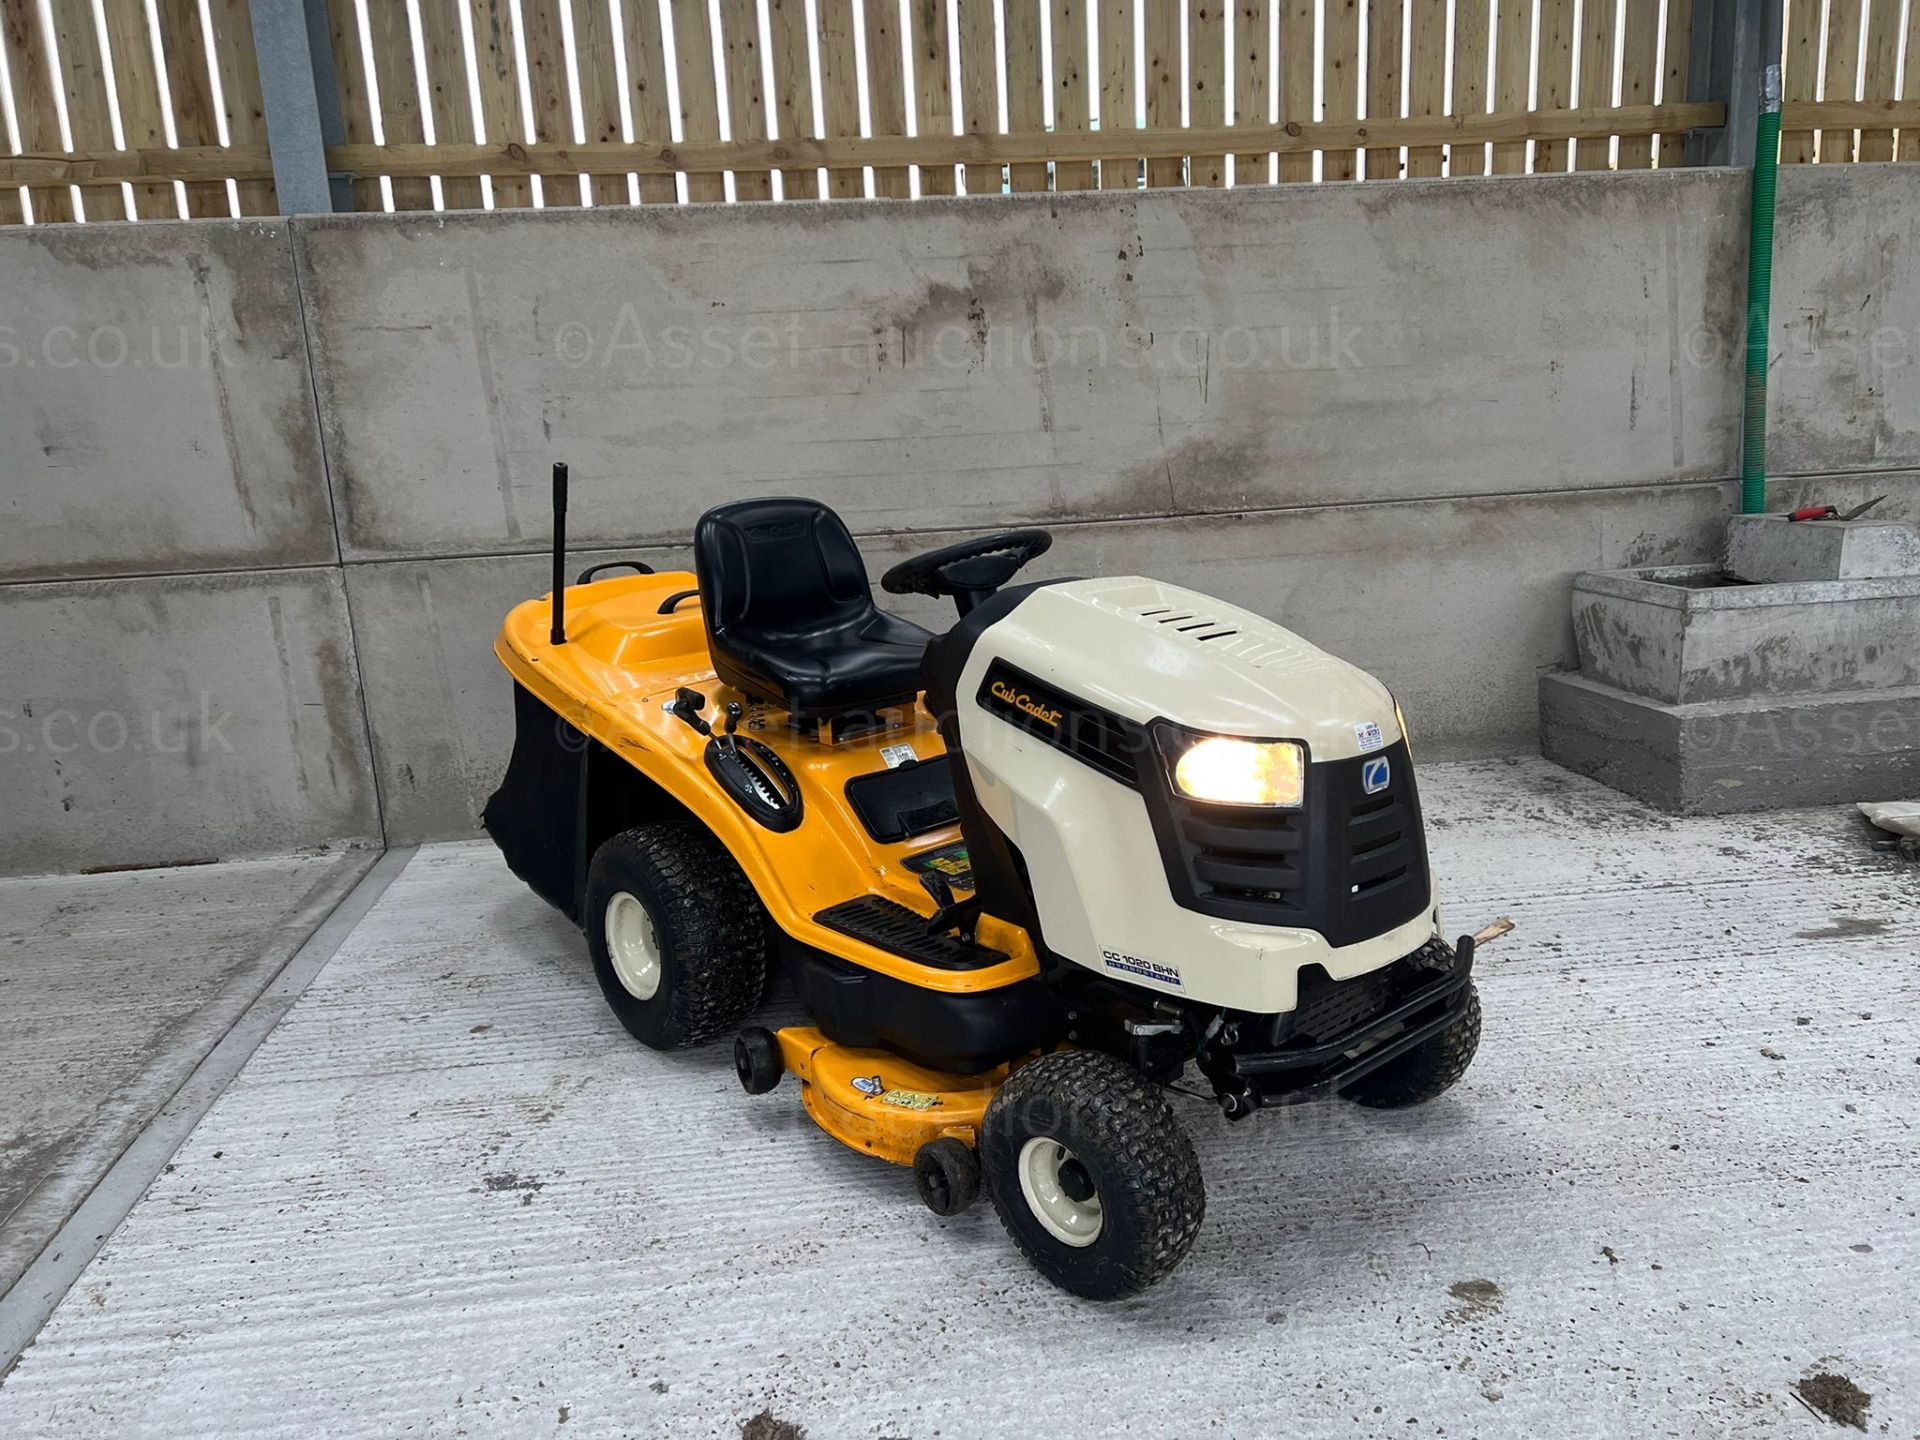 2015 CUB CADET 1020 RIDE ON LAWN MOWER, RUNS WORKS AND CUTS WELL, ONLY 250 HOURS FROM NEW *NO VAT*